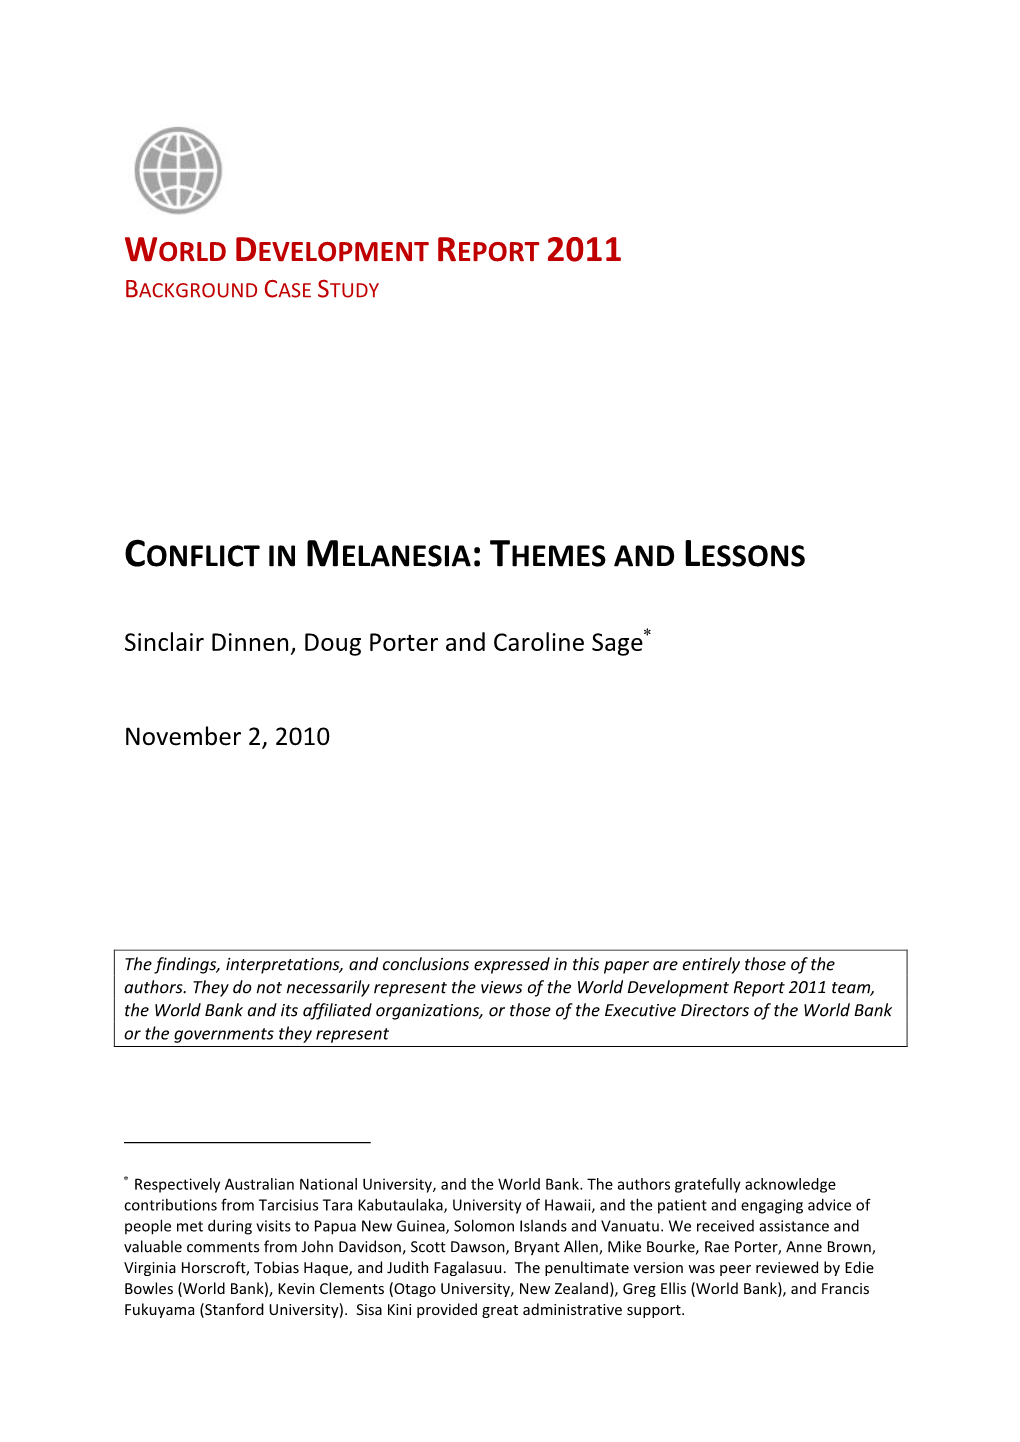 Conflict in Melanesia: Themes and Lessons